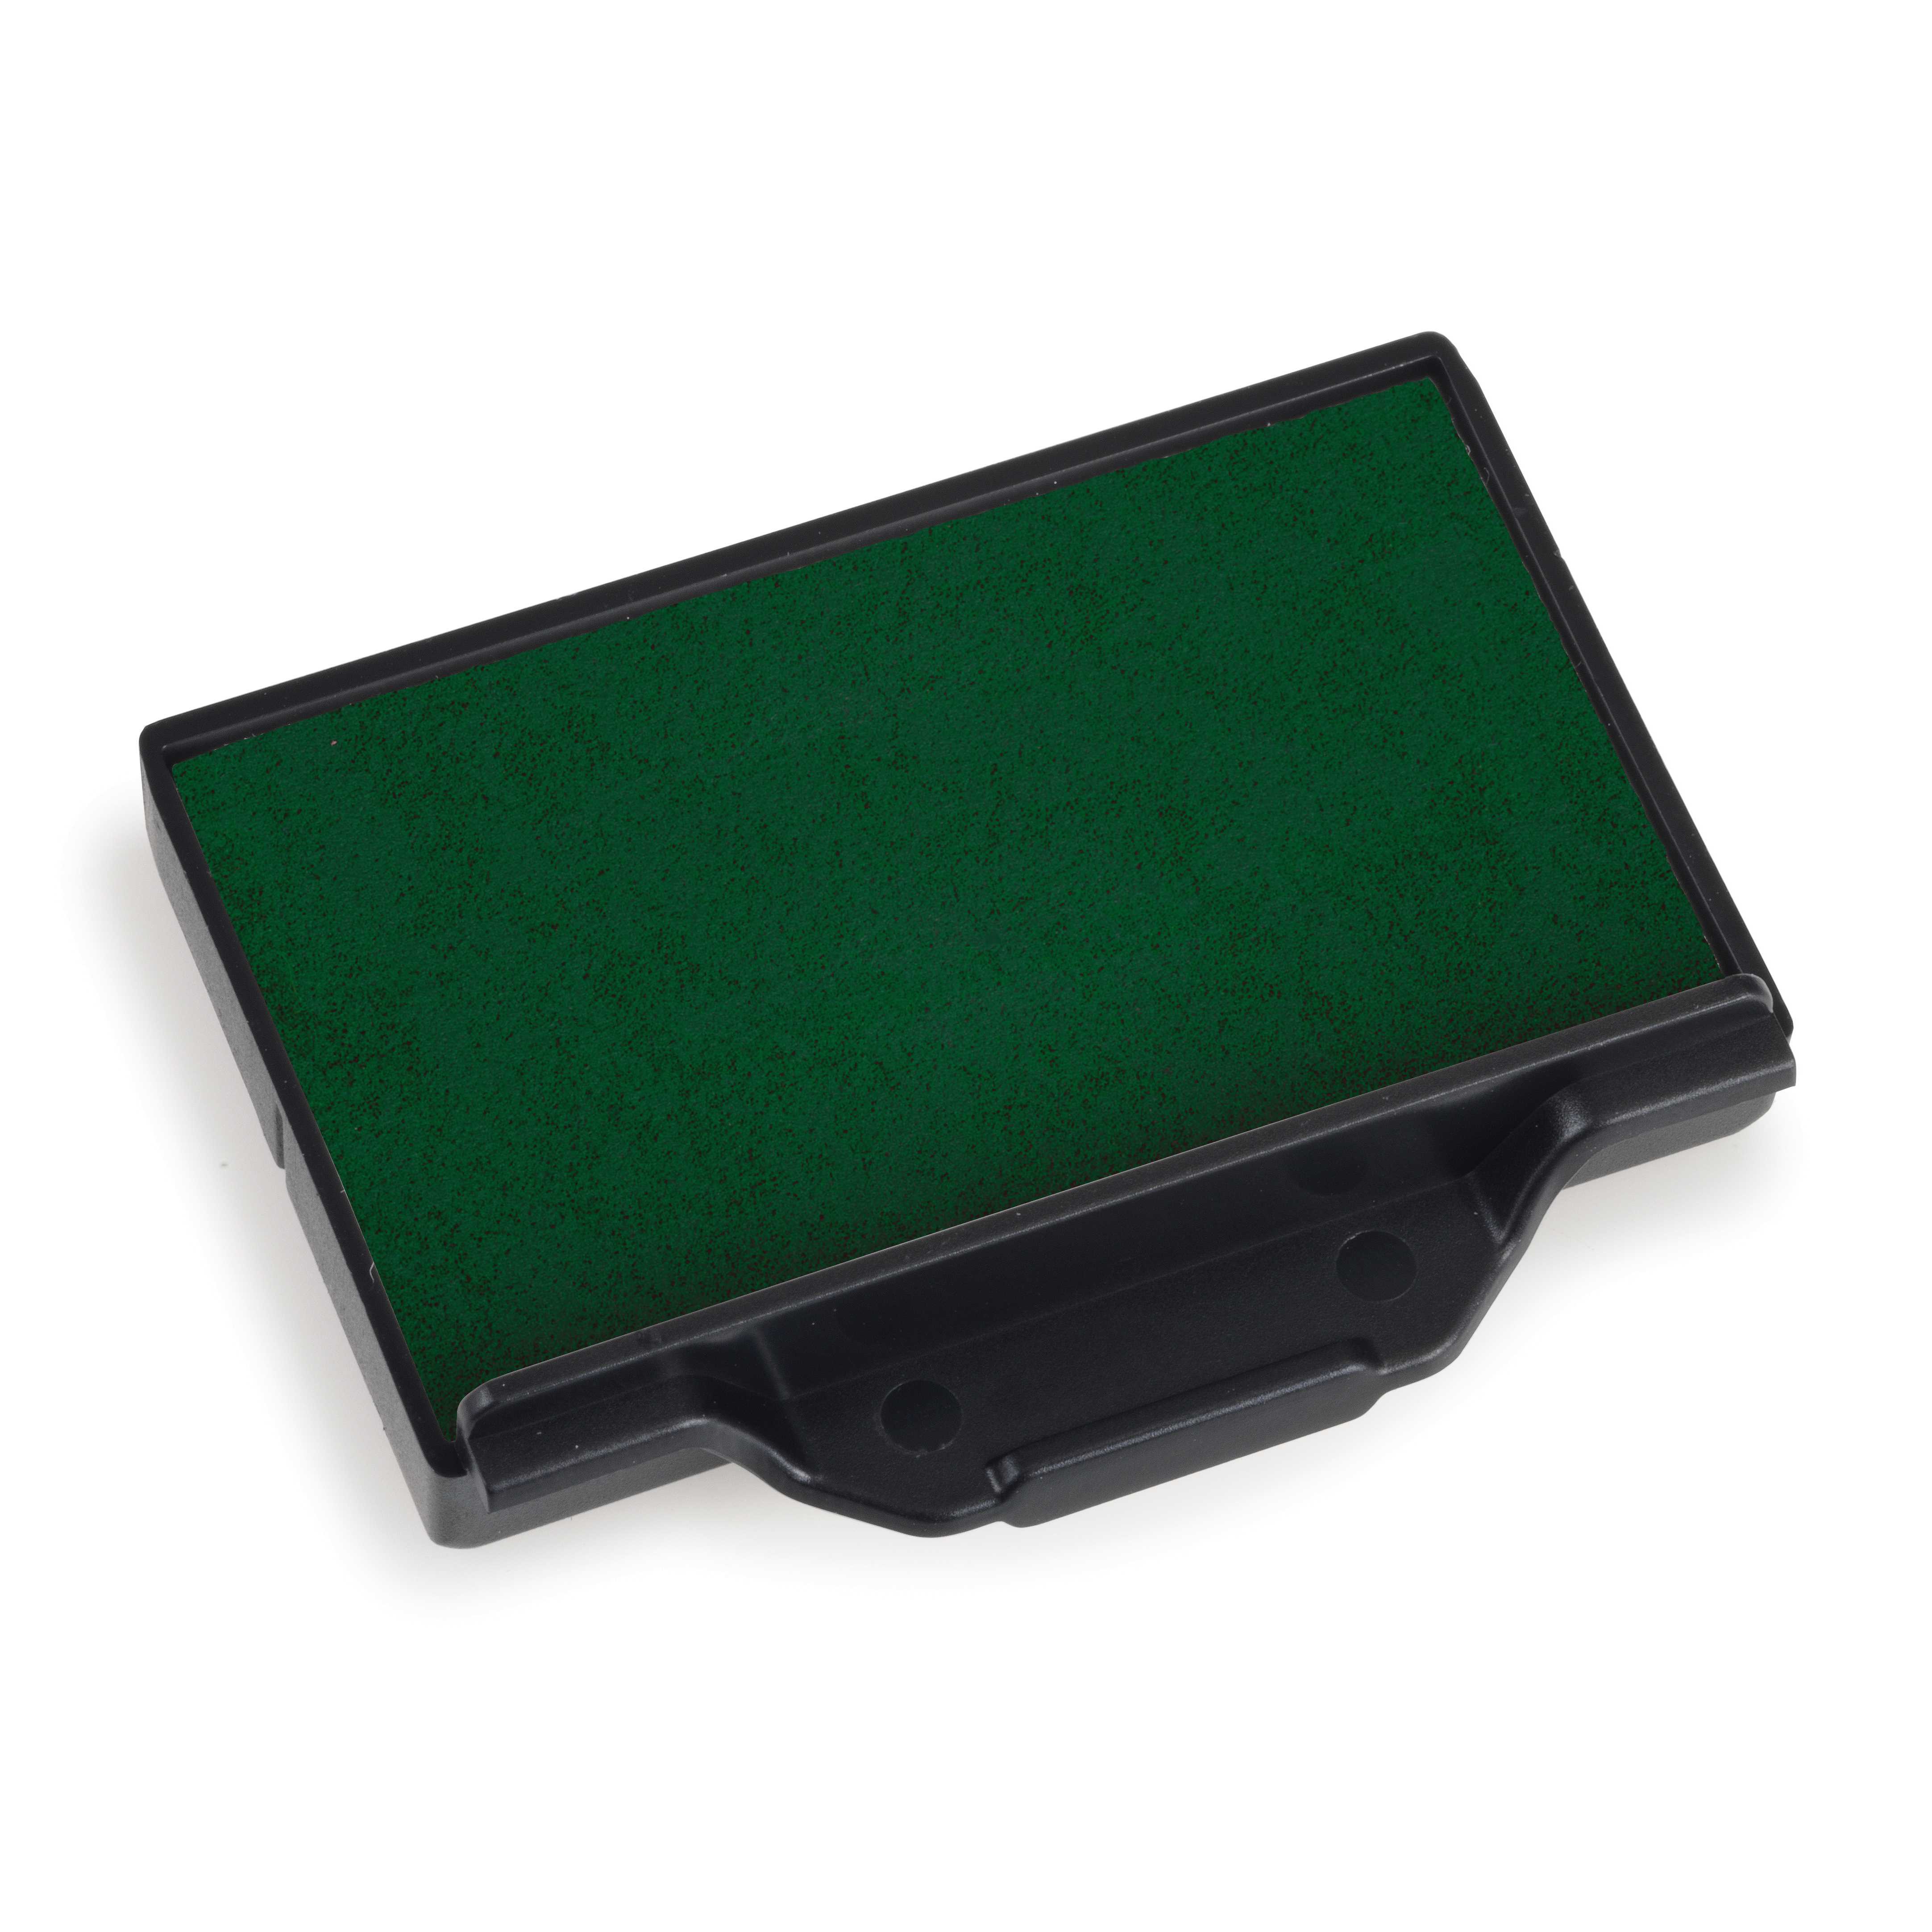 Replacement Pad for Trodat 5203 Self Inking Stamp - Green Ink Color